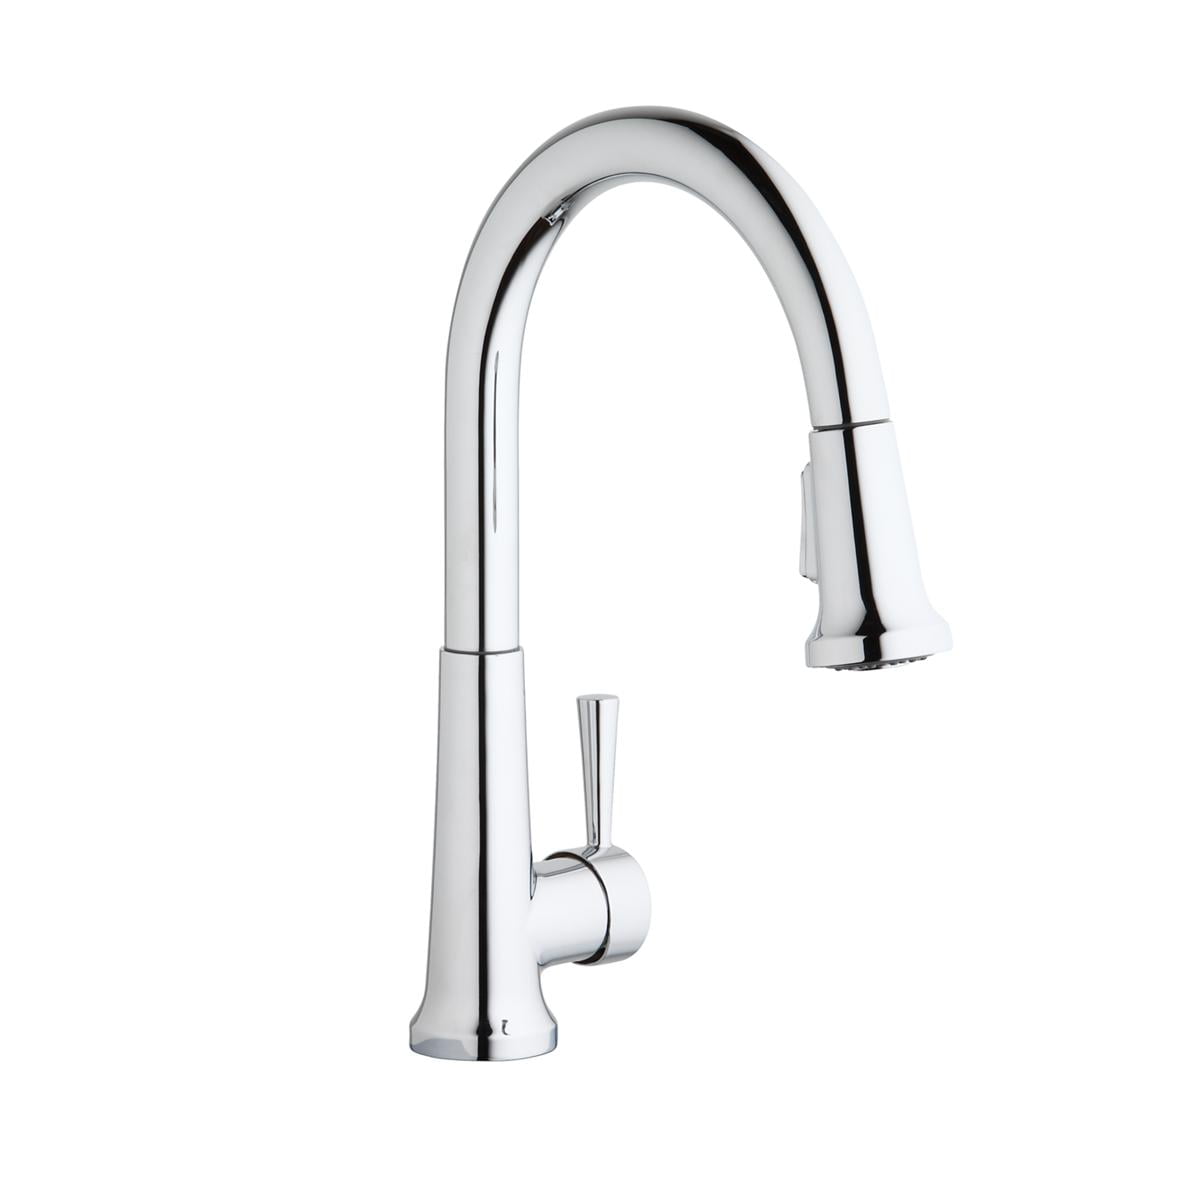 Elkay Everyday Single Hole Deck Mount Kitchen Faucet with Pull-down Spray  Forward Only Lever Handle Chrome